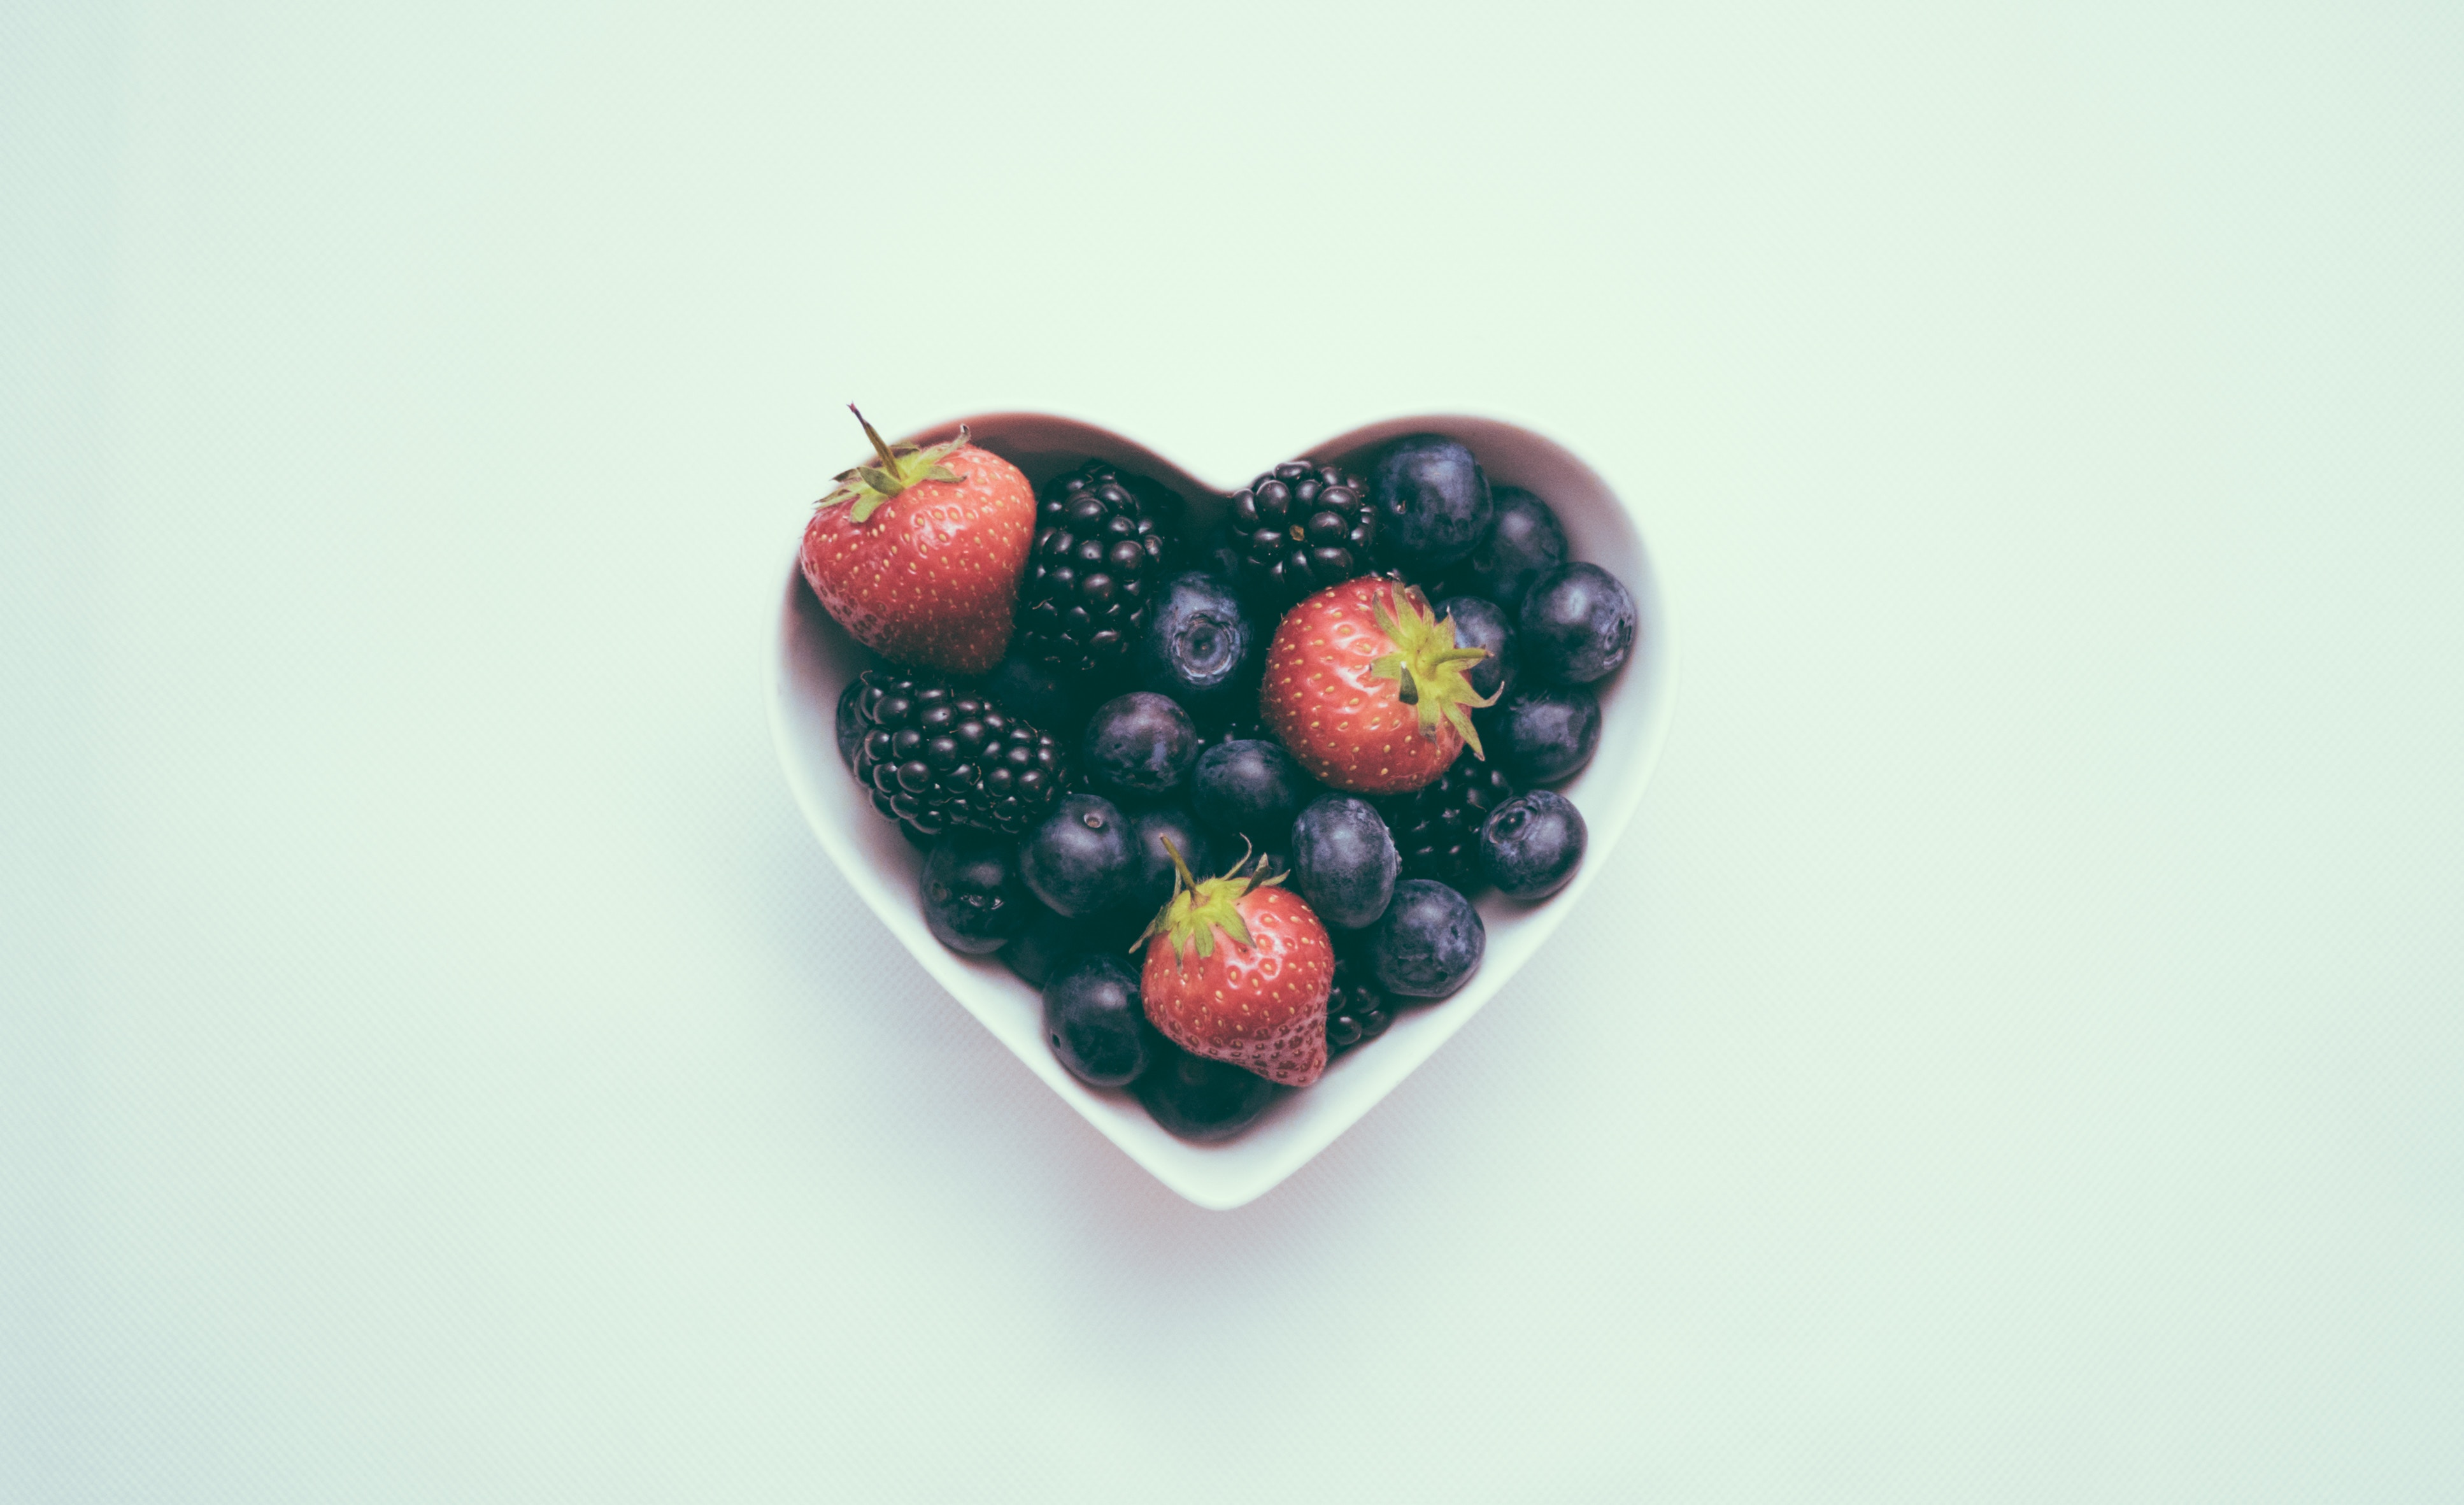 A heart-shaped bowl on a pastel blue background holds some strawberries and blueberries. 